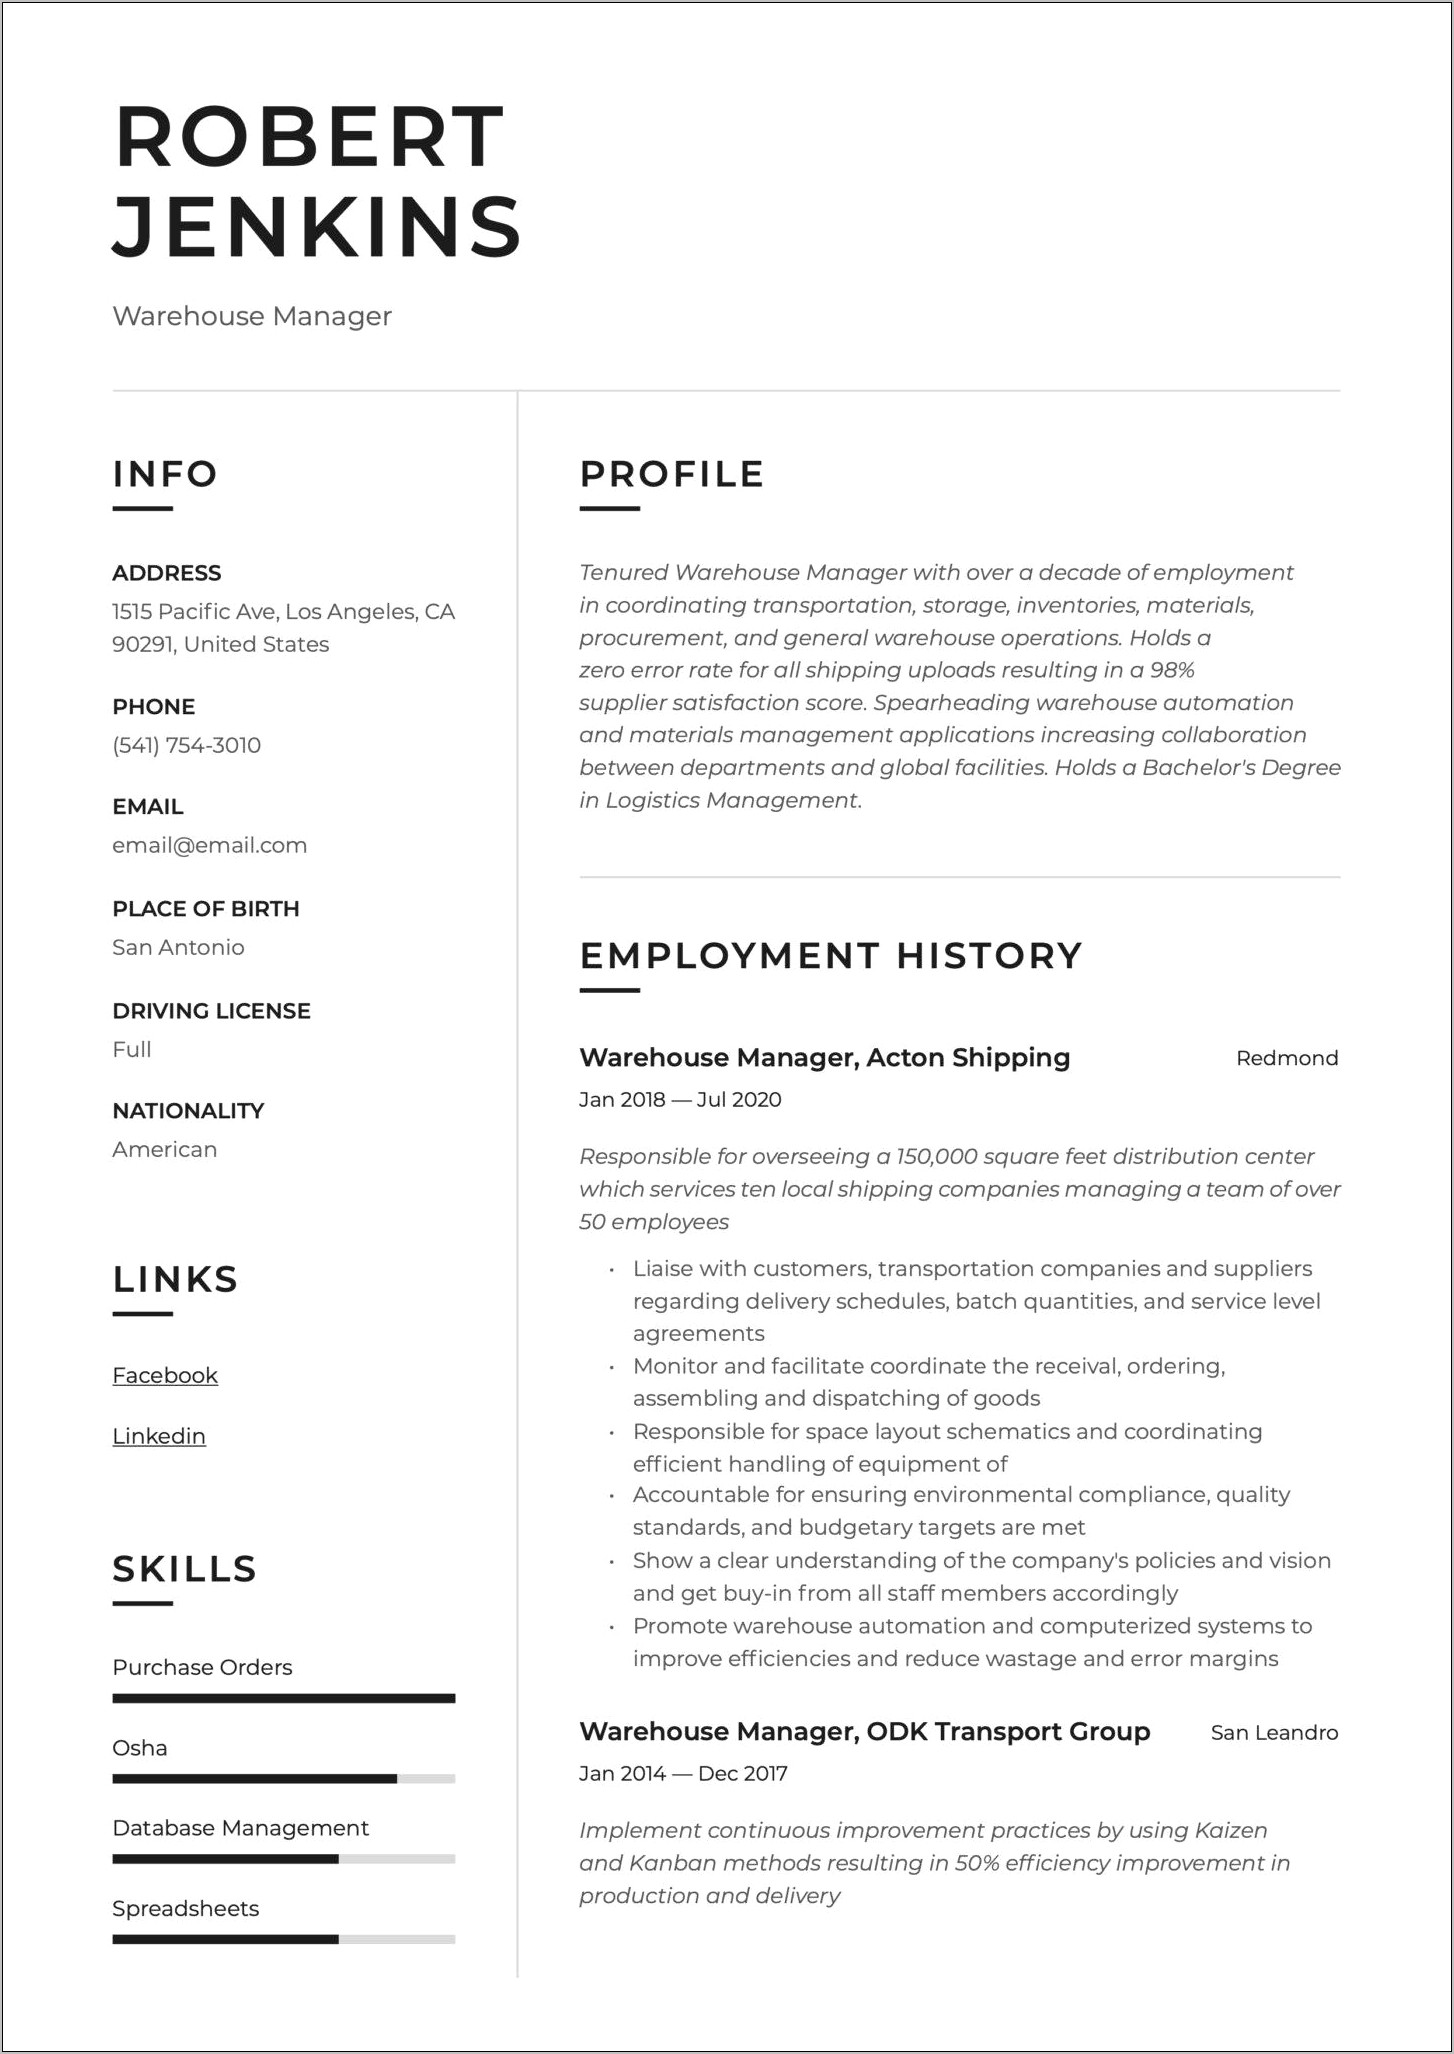 Warehouse Manager Resume Bullet Points